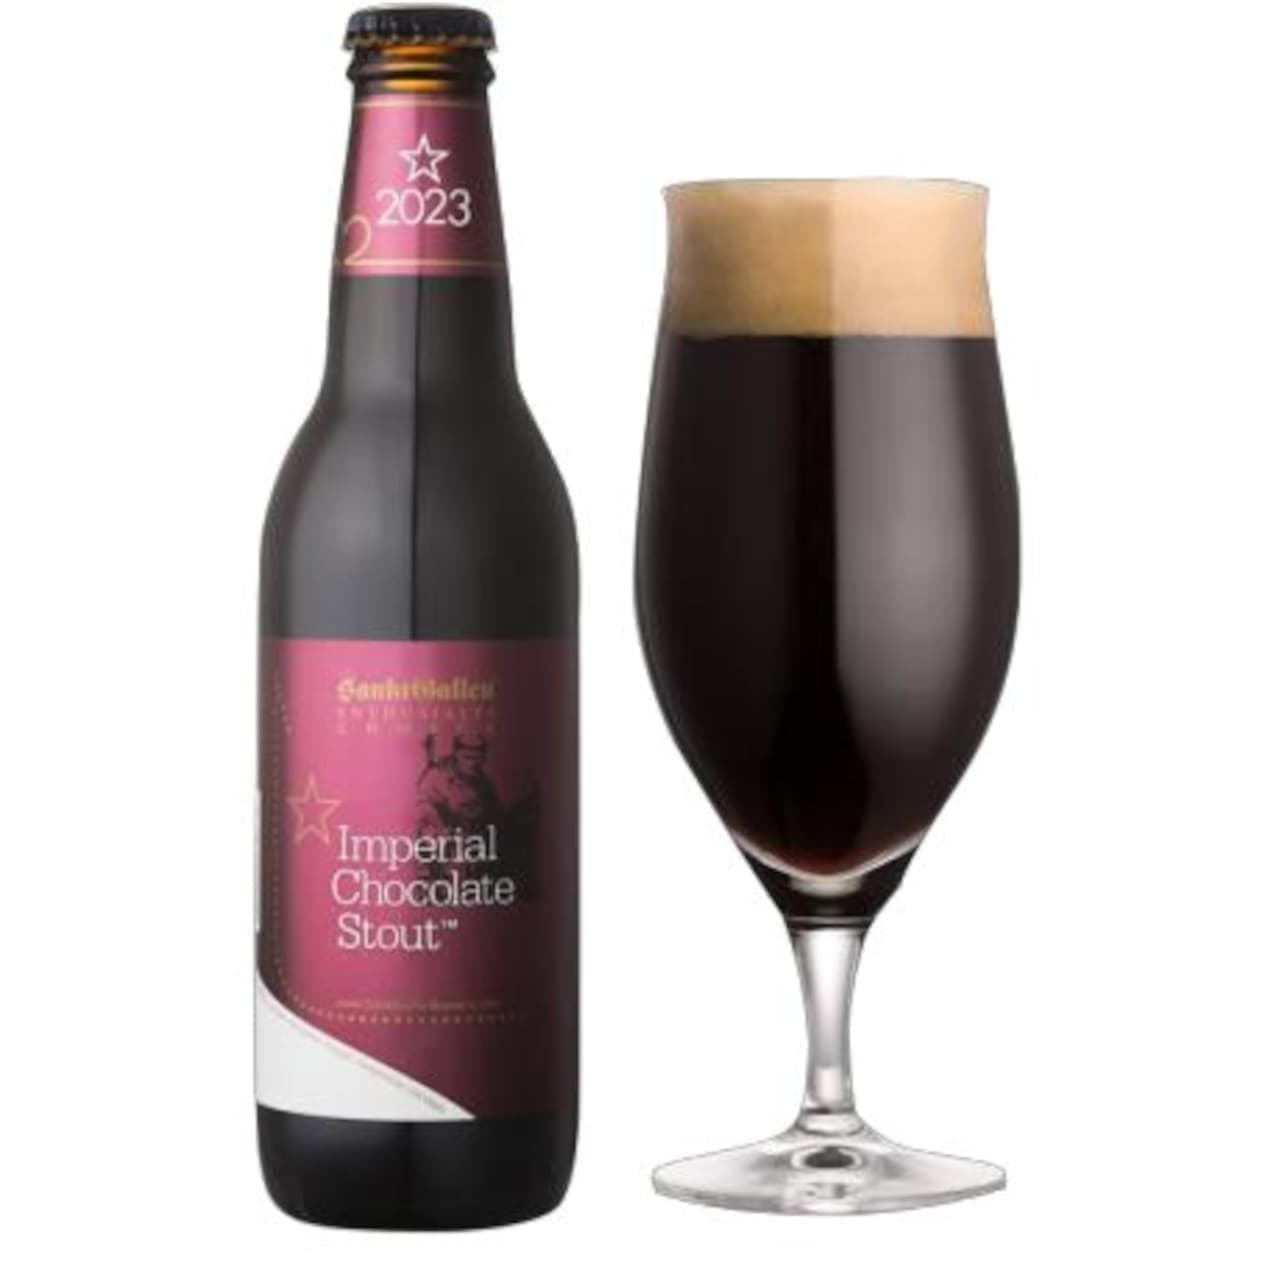 St. Gallen "Imperial Chocolate Stout 2023"